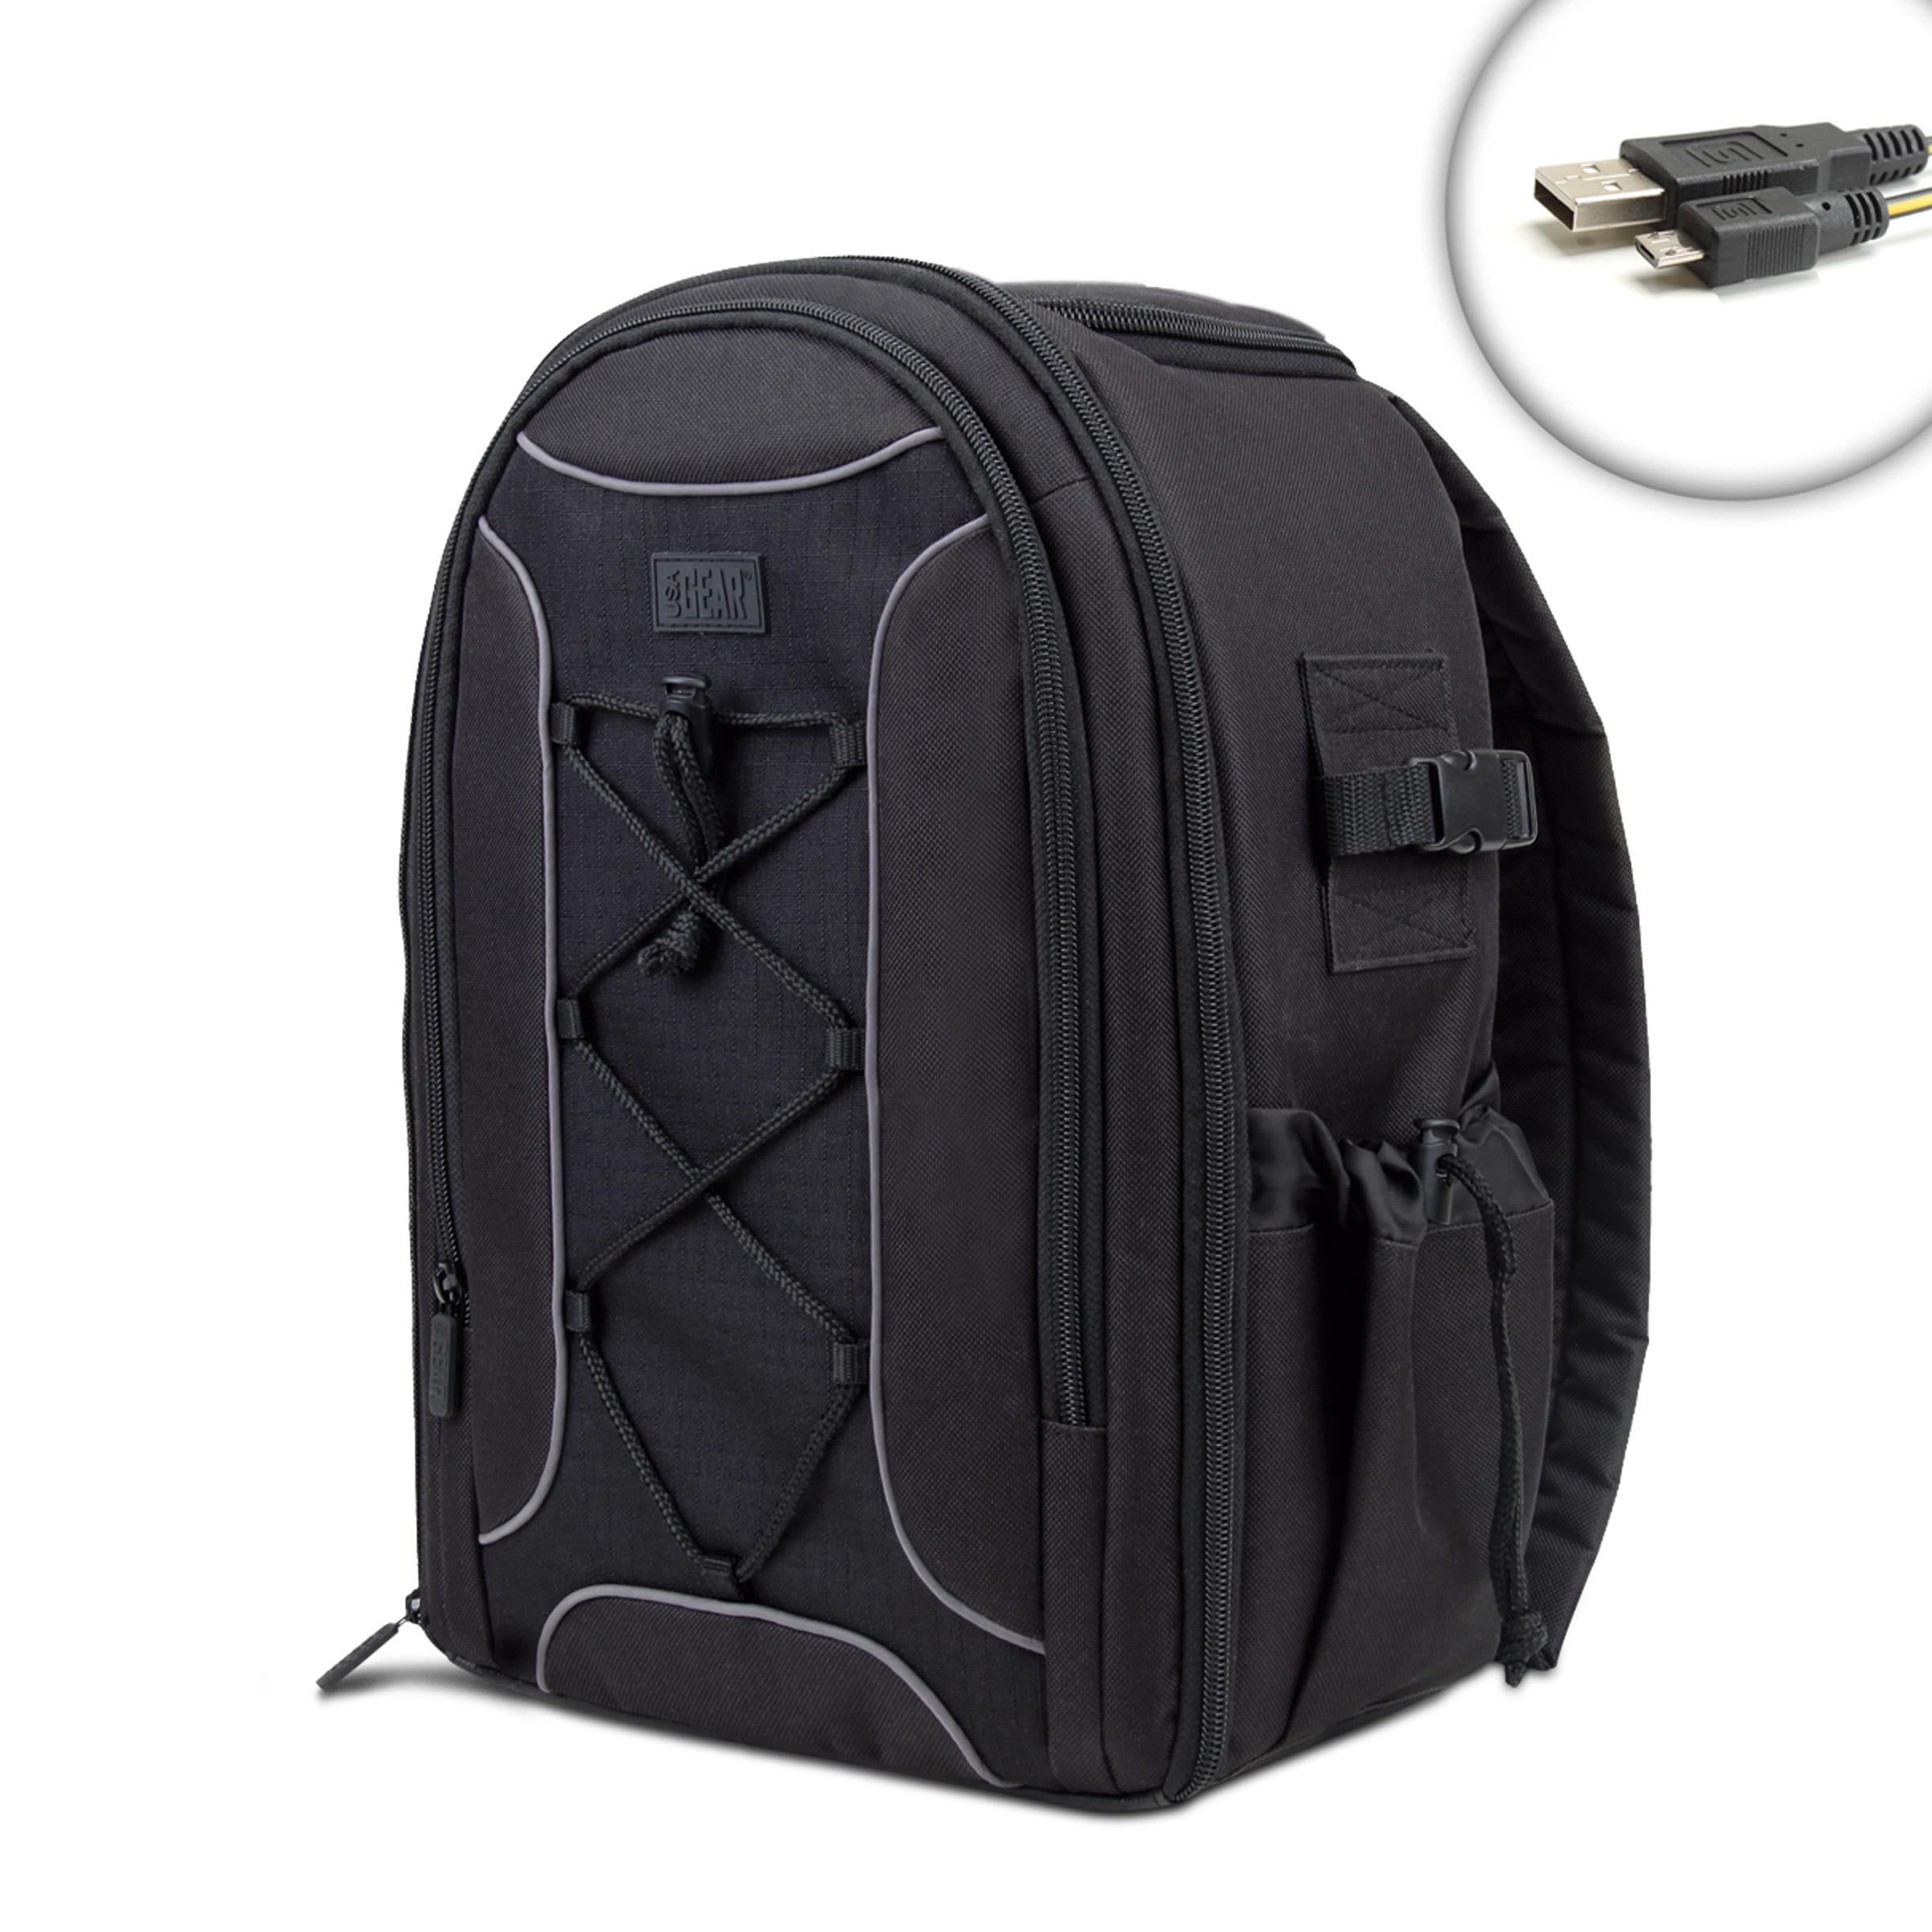 DURAGADGET Water-Resistant Black Backpack with Customisable Interior & Raincover Compatible with The Topelek 8 x 21